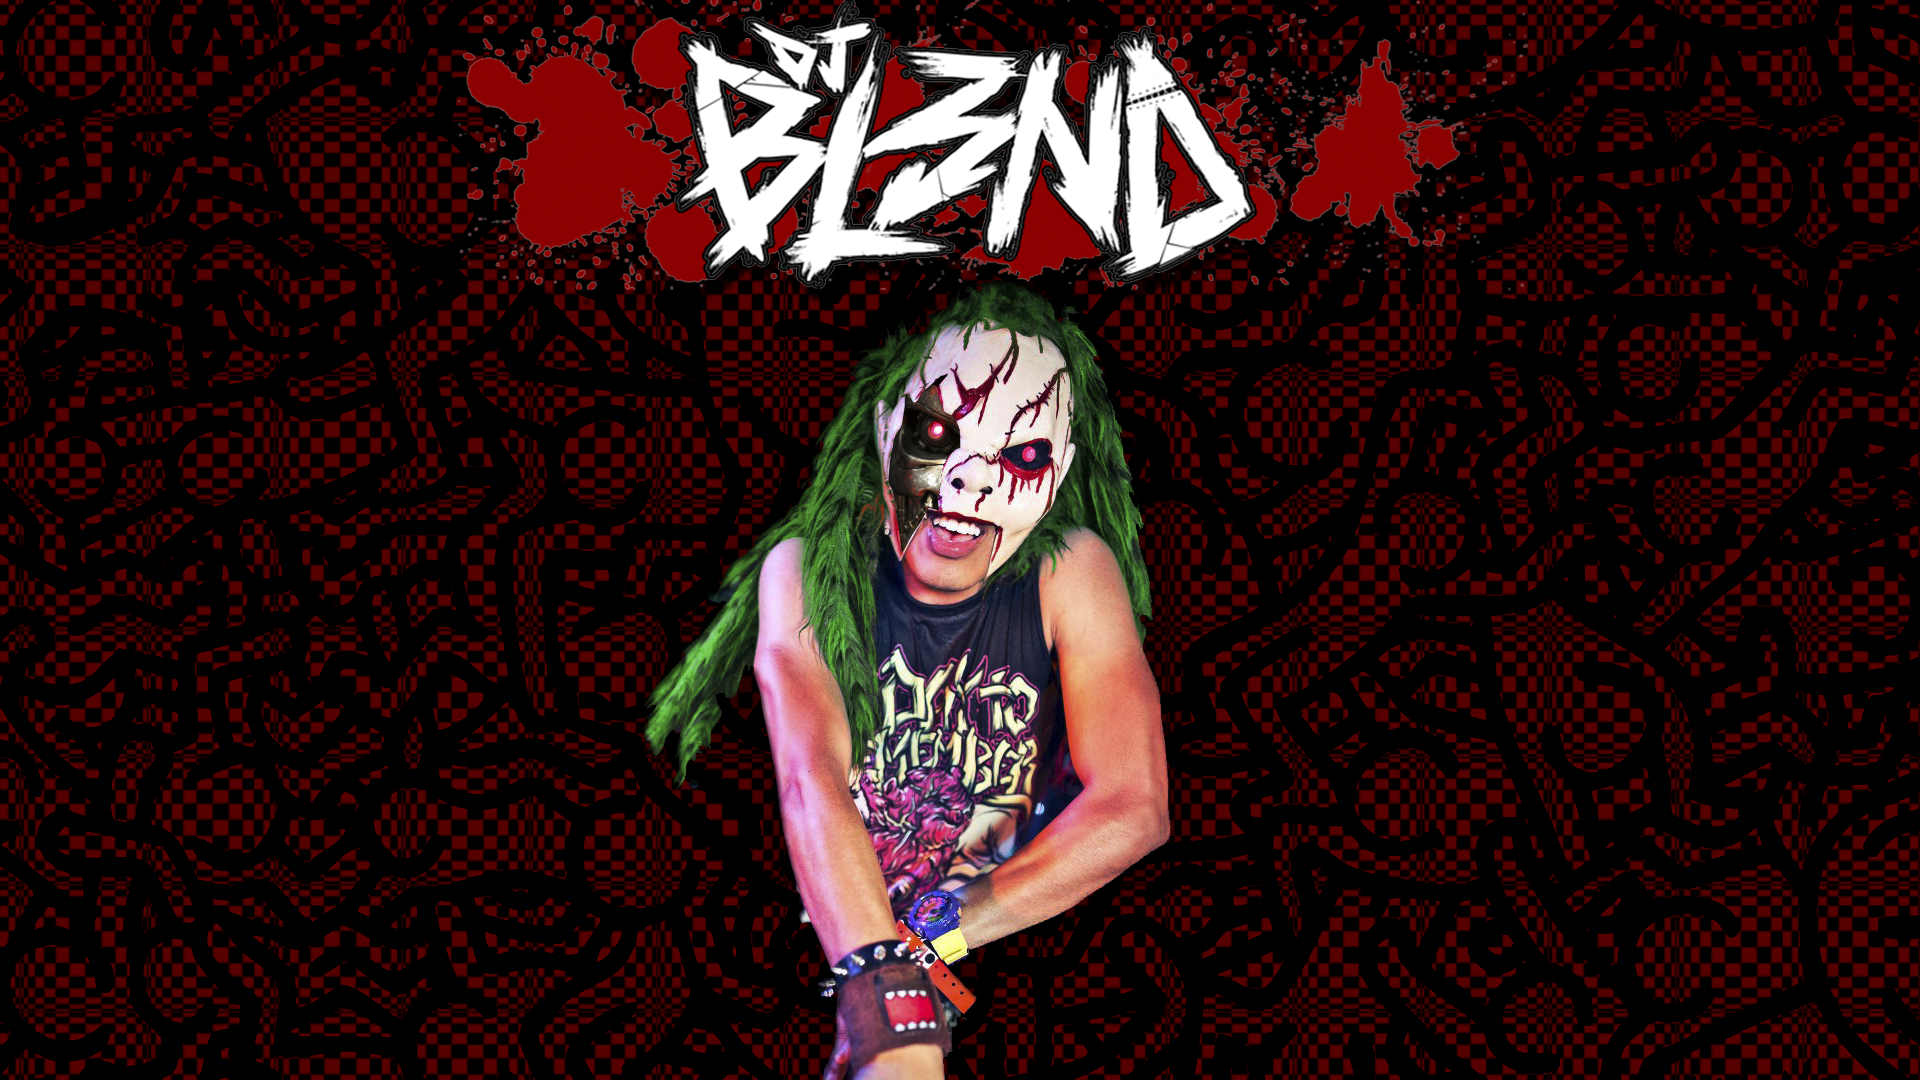 4 DJ BL3ND HD Wallpapers Backgrounds - Wallpaper Abyss